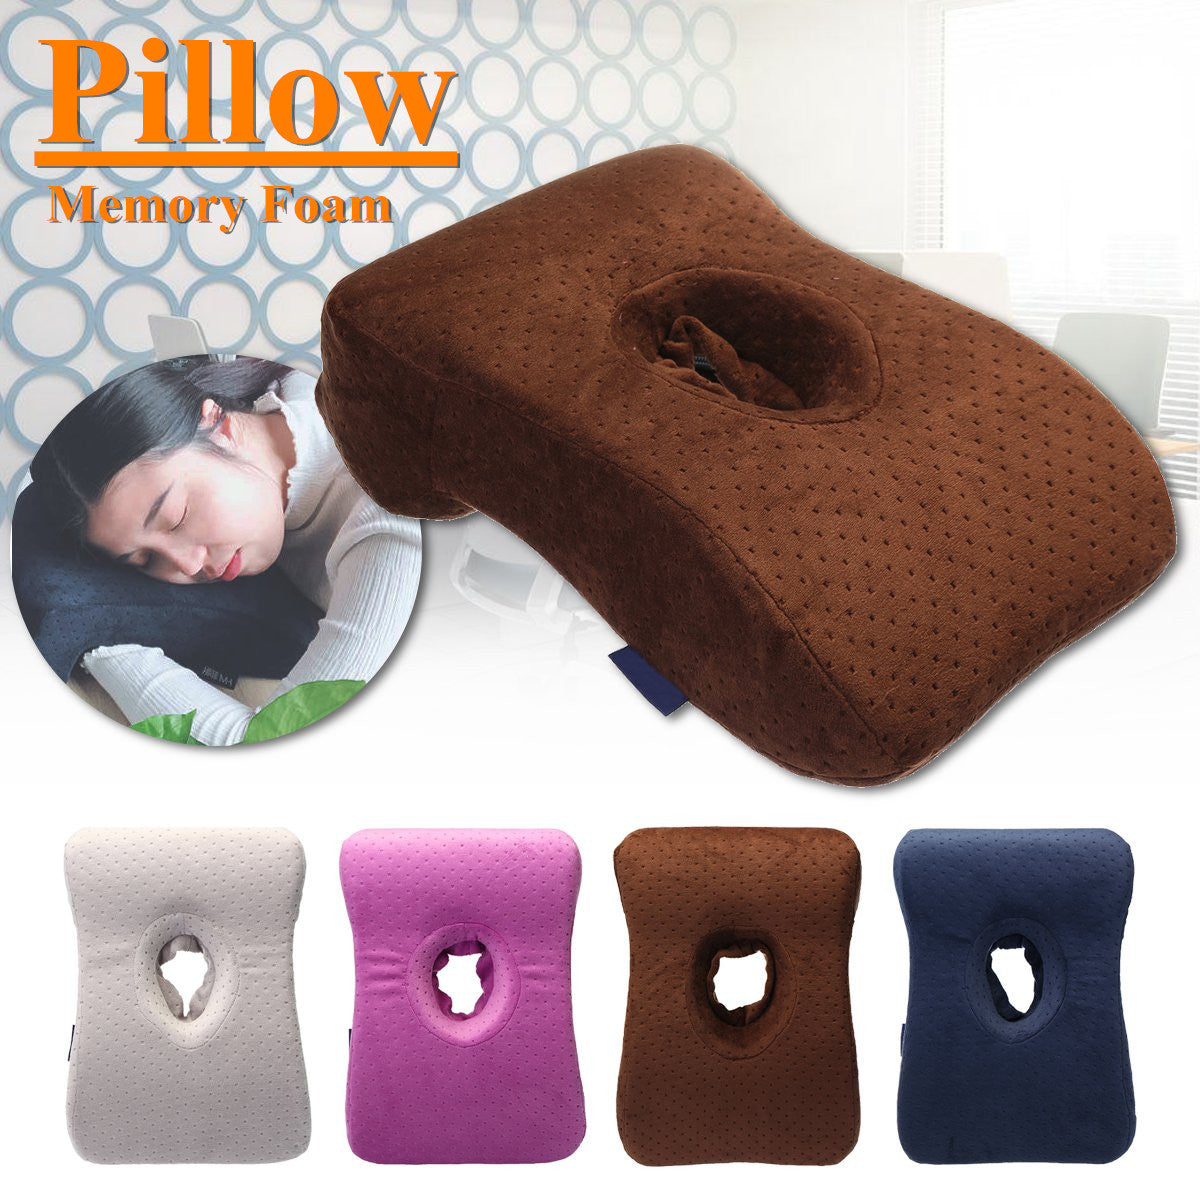 Memory Foam Pillow Comfortable Office Table Neck Rest Sleeping Soft Cushion